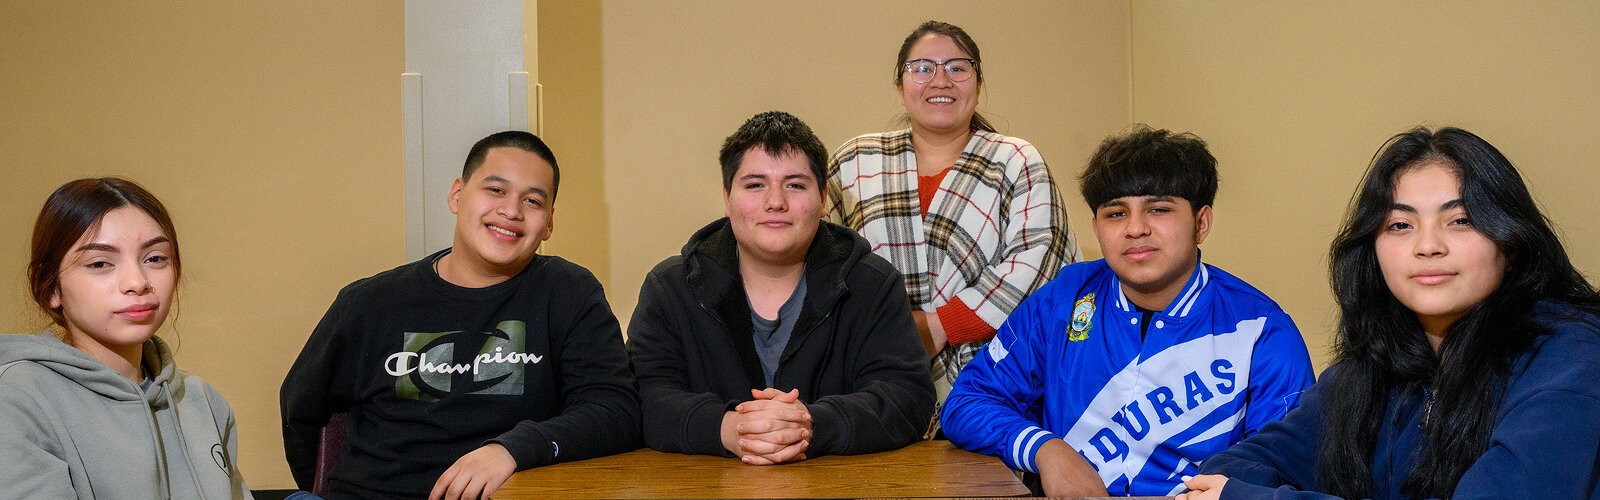 Lesli Ariana Moncivaiz, Roderick Domingo, Gadiel Rodriguez, Diana Bernal, Miguel Almendores, and Ashley M. (requested that surname not be used) at Ypsilanti Community High School.